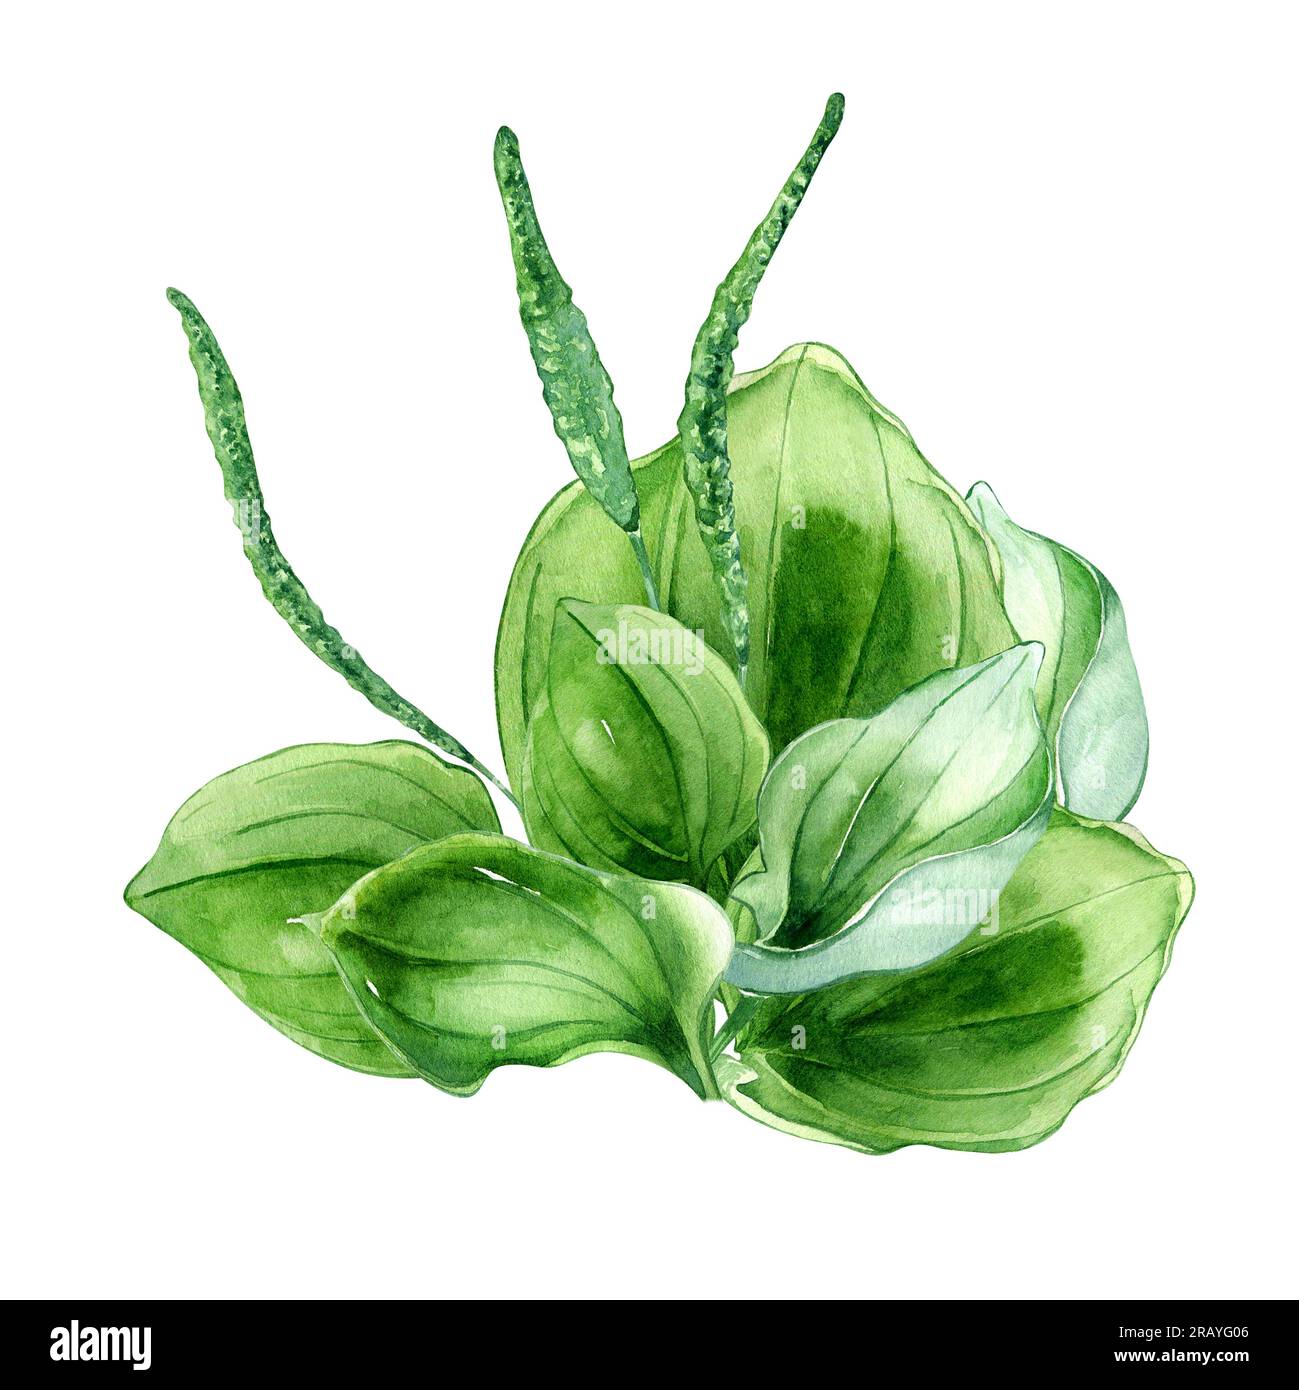 Plantago broadleaf medicinal plant watercolor illustration isolated on white background. Plantain, green leaves, useful herb, psyllium hand drawn. Des Stock Photo